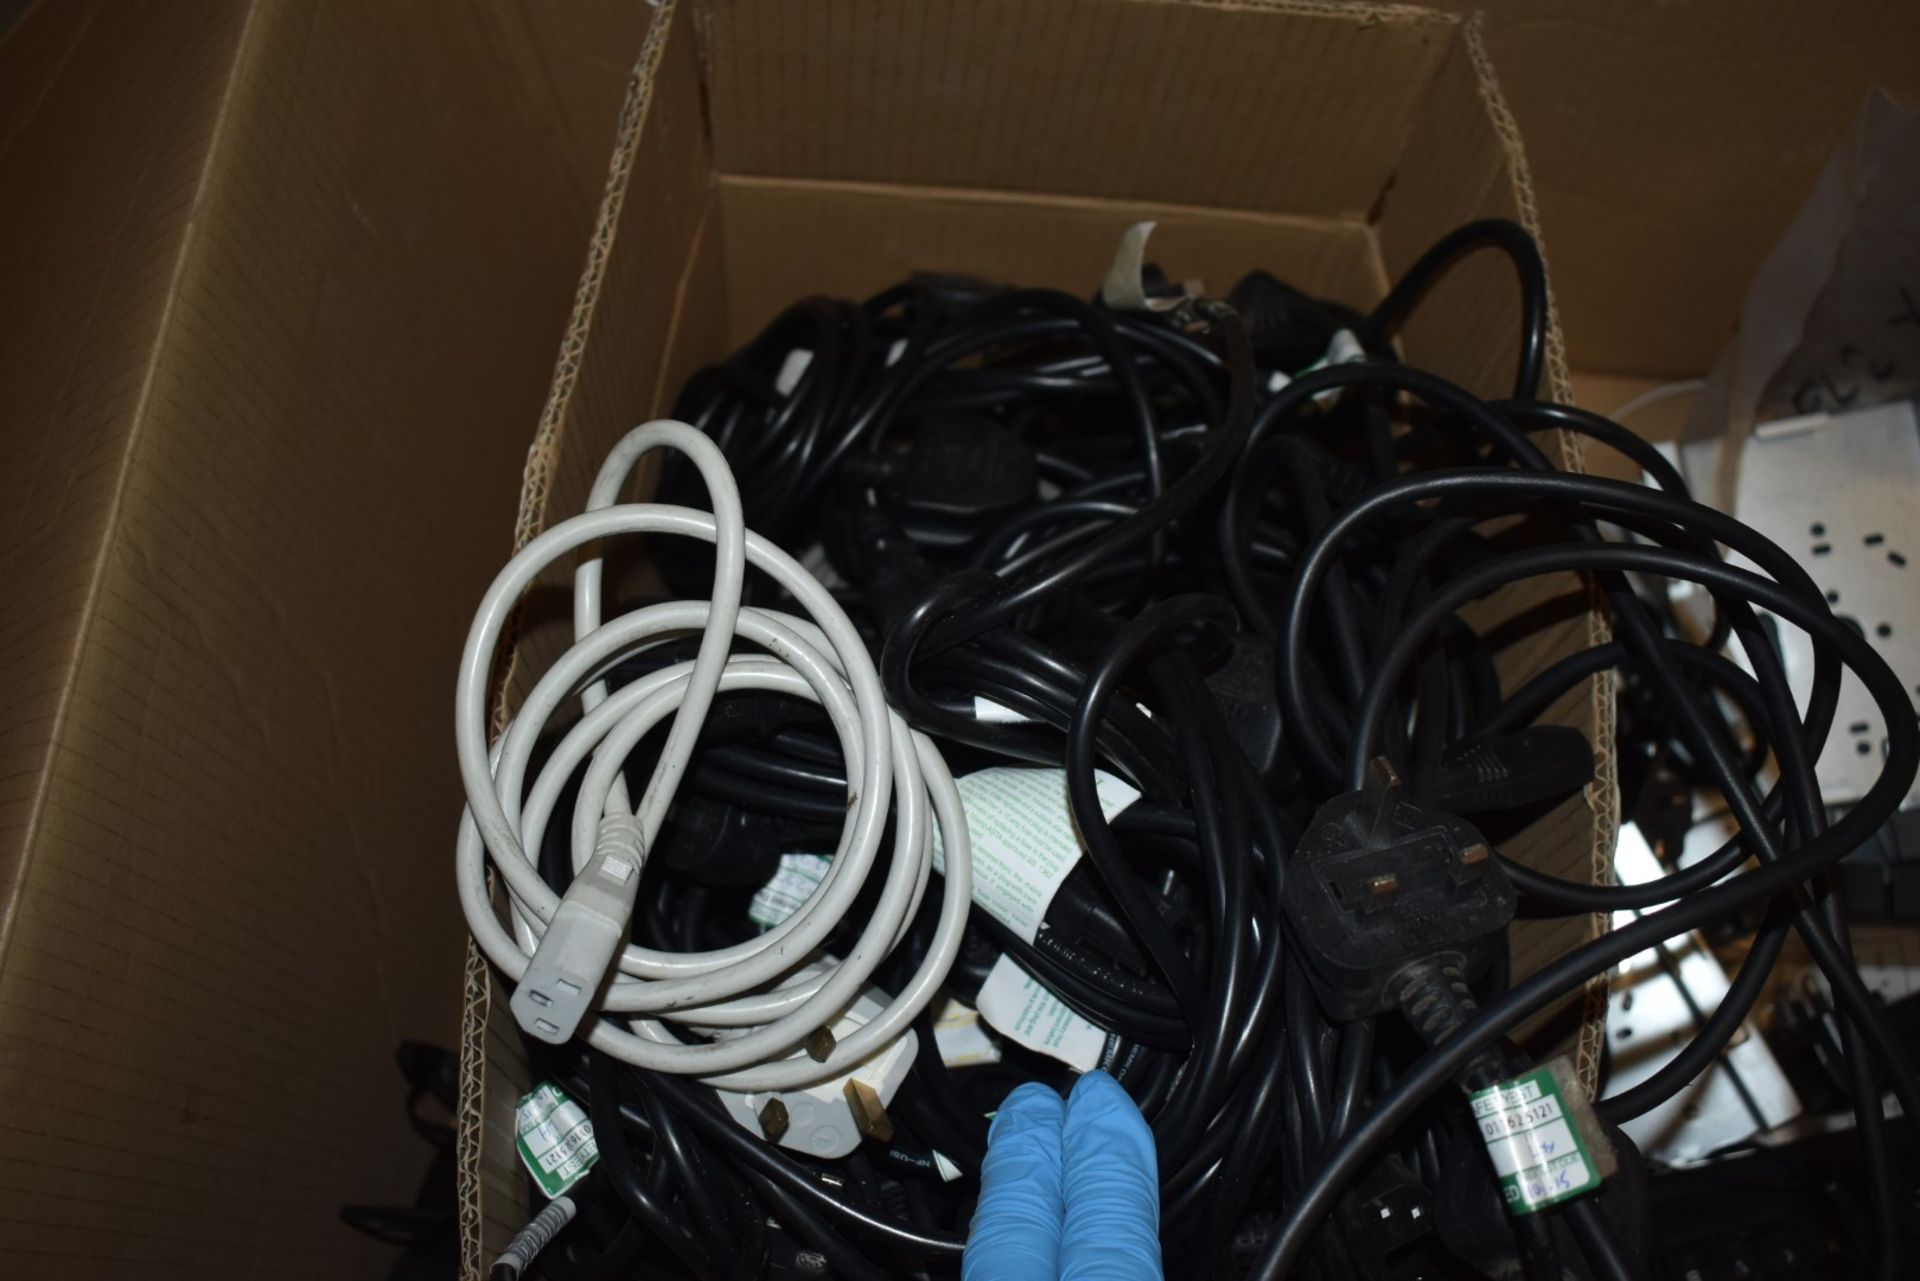 1 x Assorted Pallet Lot of Computer Equipment - Includes Laser Printer, Kettle Leads, And More! - Image 7 of 7